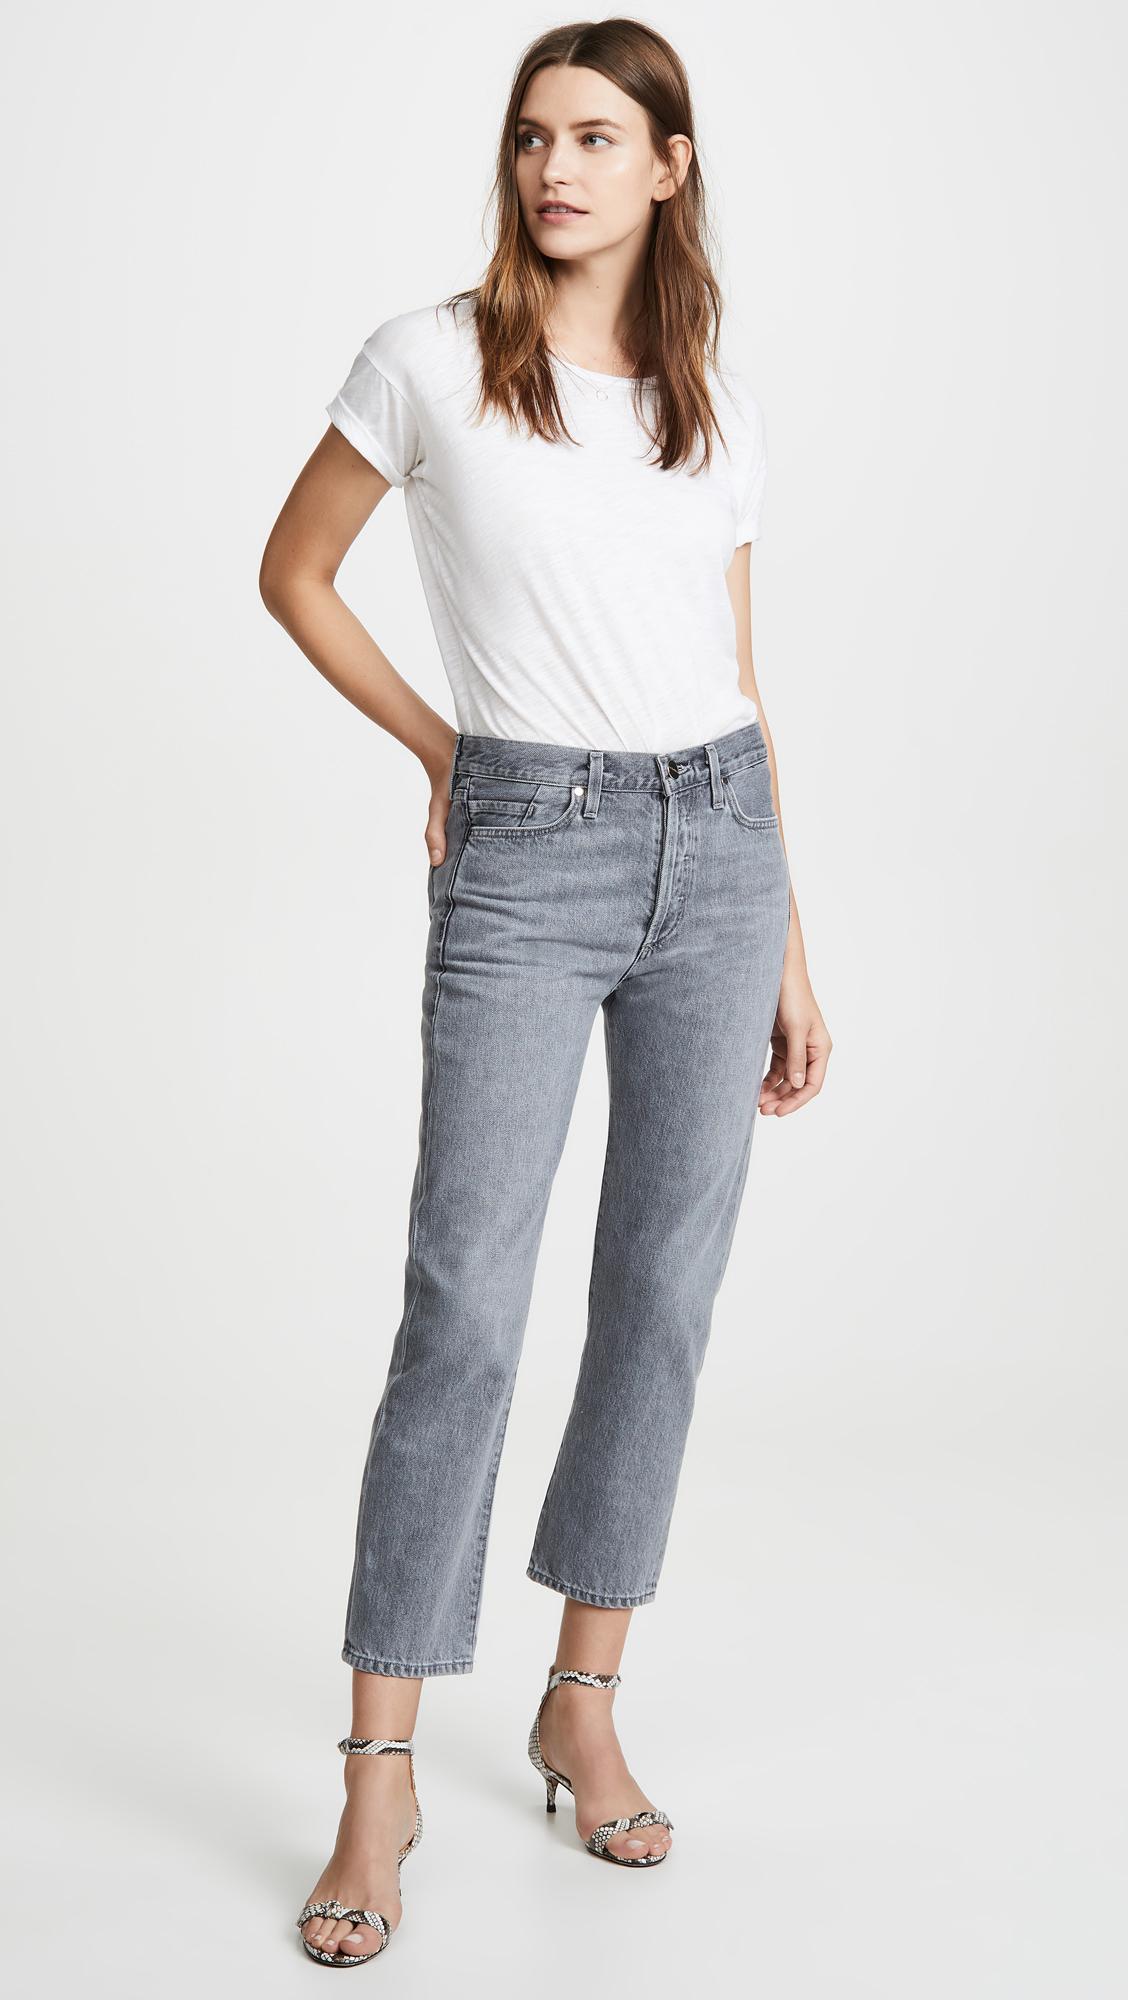 Goldsign Denim The Low Slung Jeans in Blue - Lyst